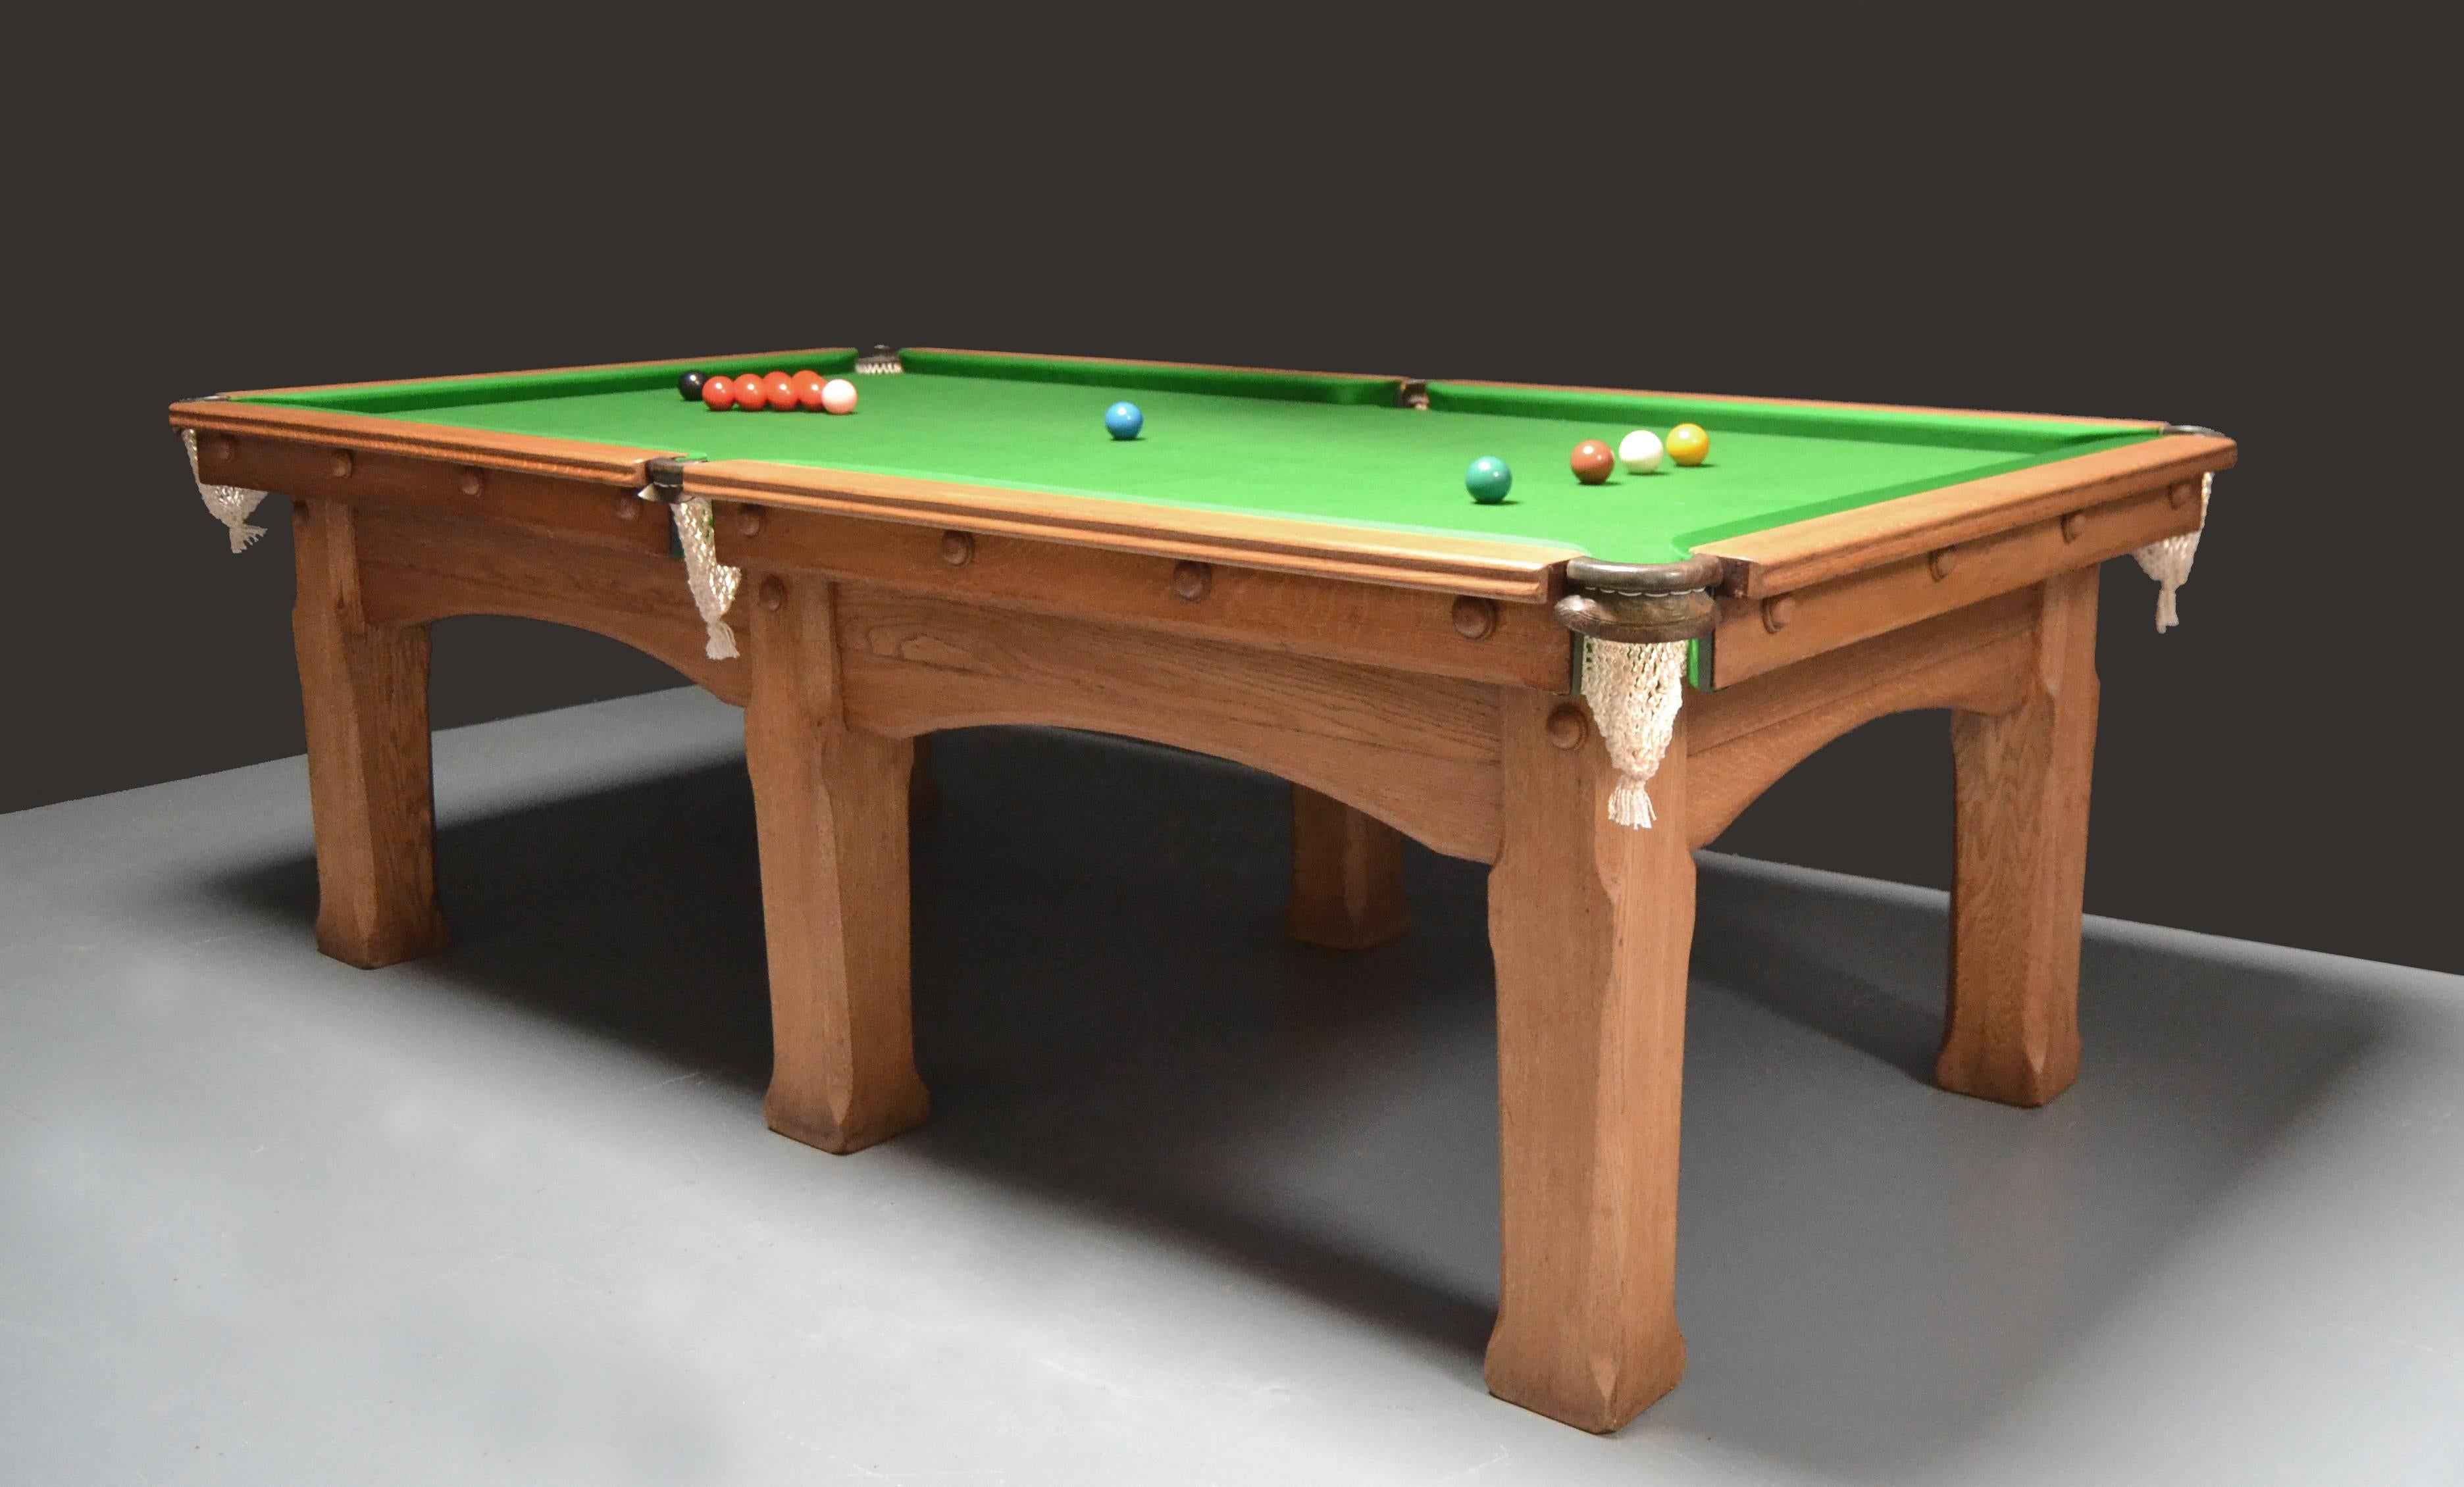 A rare solid oak 8ft x 4ft Arts & Crafts antique billiard Snooker or pool table circa 1910,retains original leathers , handsome solid frame with shaped and chamfered legs, supporting a three piece slate bed, the table plays superbly.

The timber